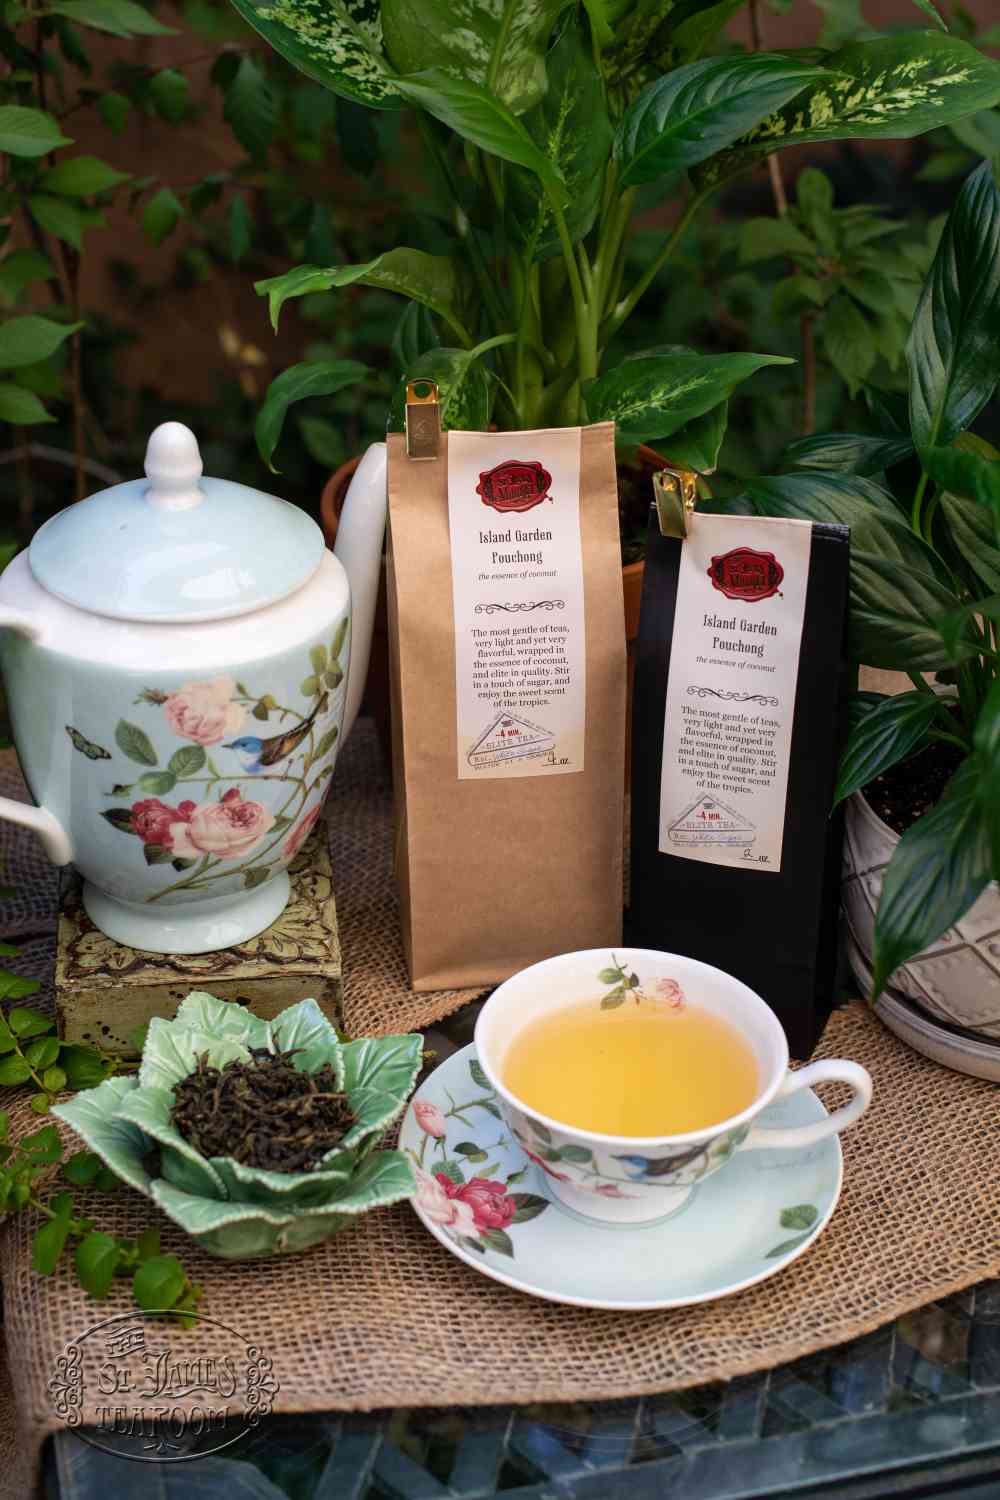 Online Tea Shop Oolong and Pouchong Tea - Island Garden Pouchong in Teacup with Leaves